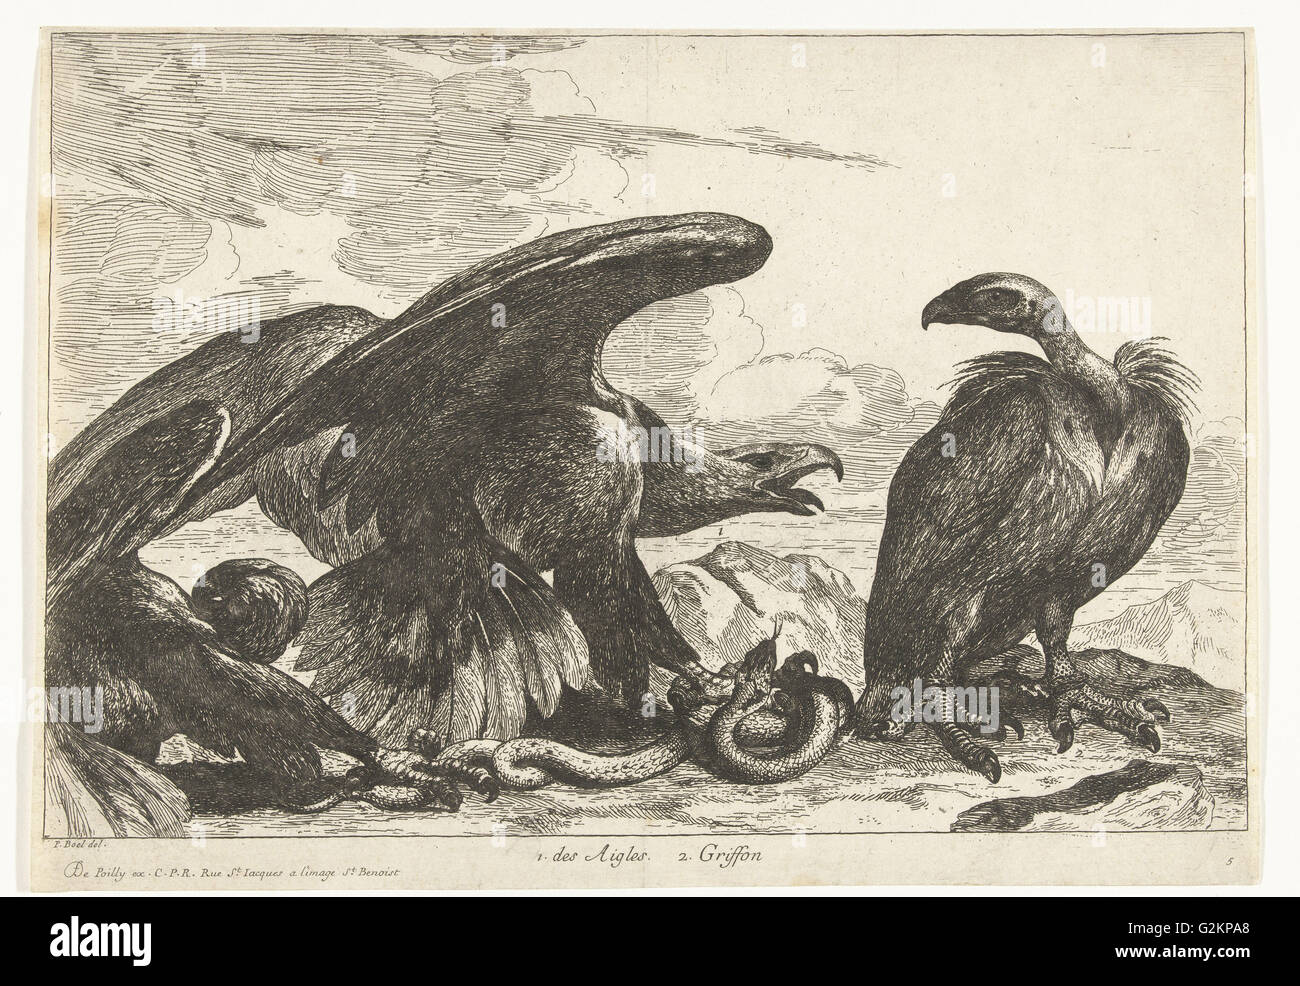 Vulture and an eagle with snake, print maker: Peeter Boel attributed to, Peeter Boel, De Poilly, 1670 - 1674 Stock Photo